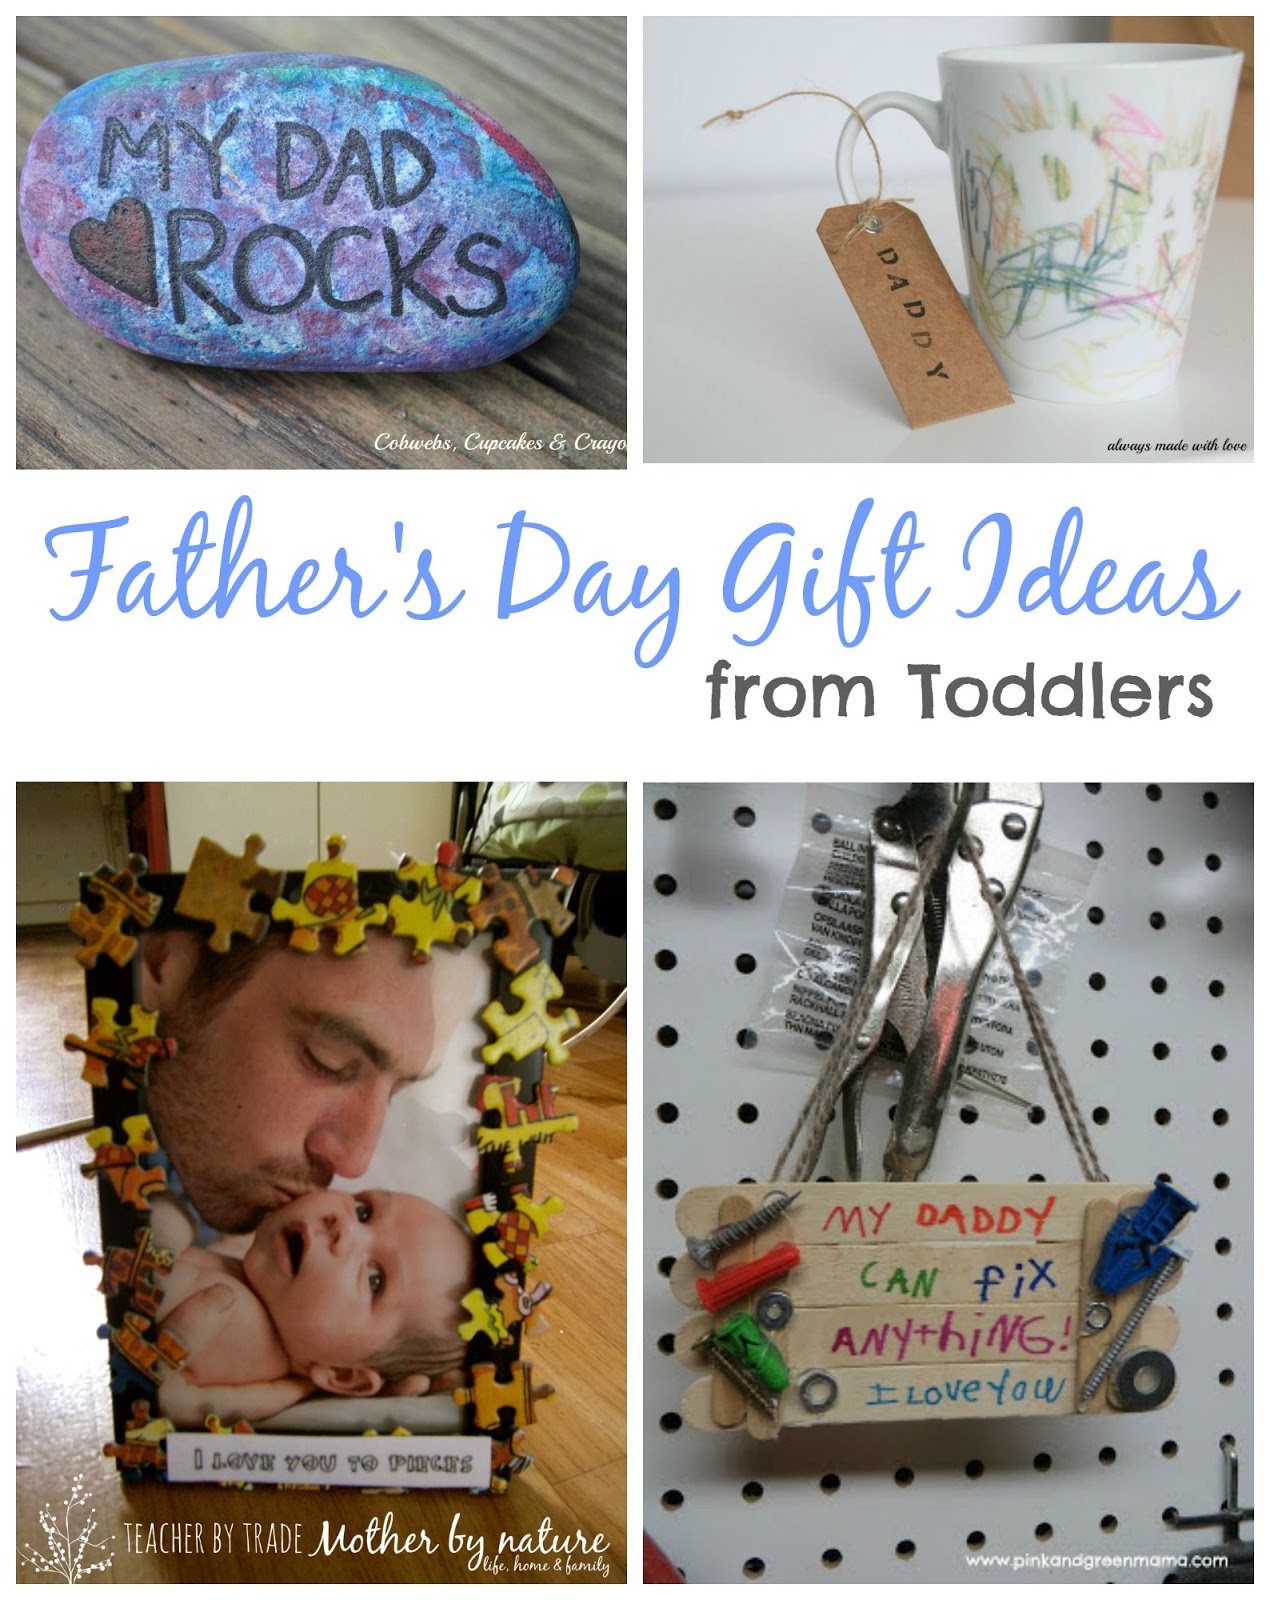 Father's Day Gift Ideas from Toddlers - Teacher by trade, Mother